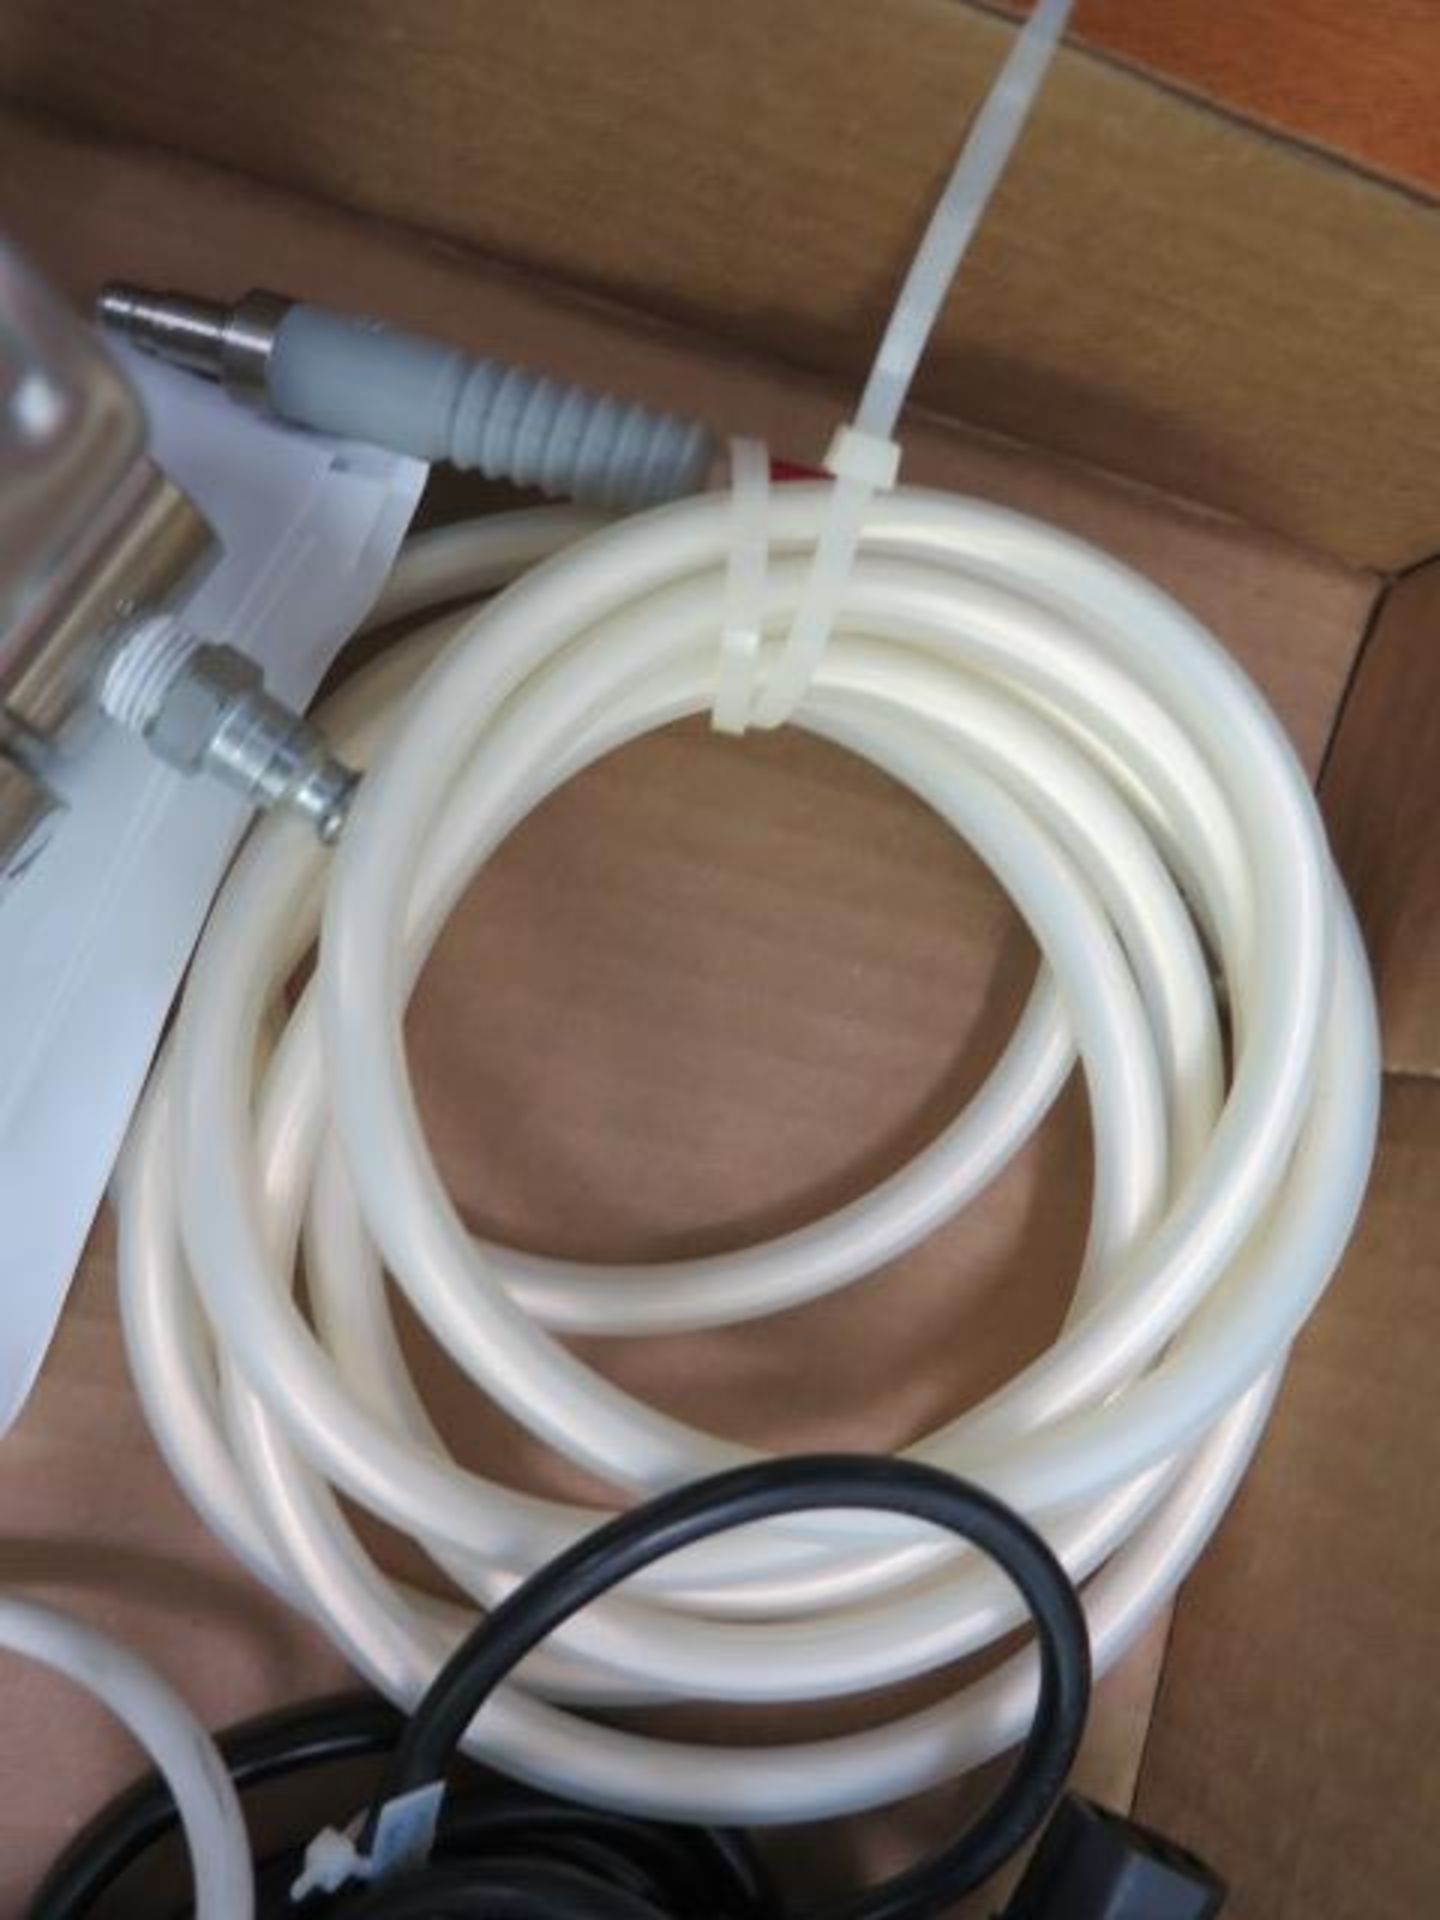 Fiberoptic Cable, Power Supply and Gas Valve (SOLD AS-IS - NO WARRANTY) - Image 5 of 5